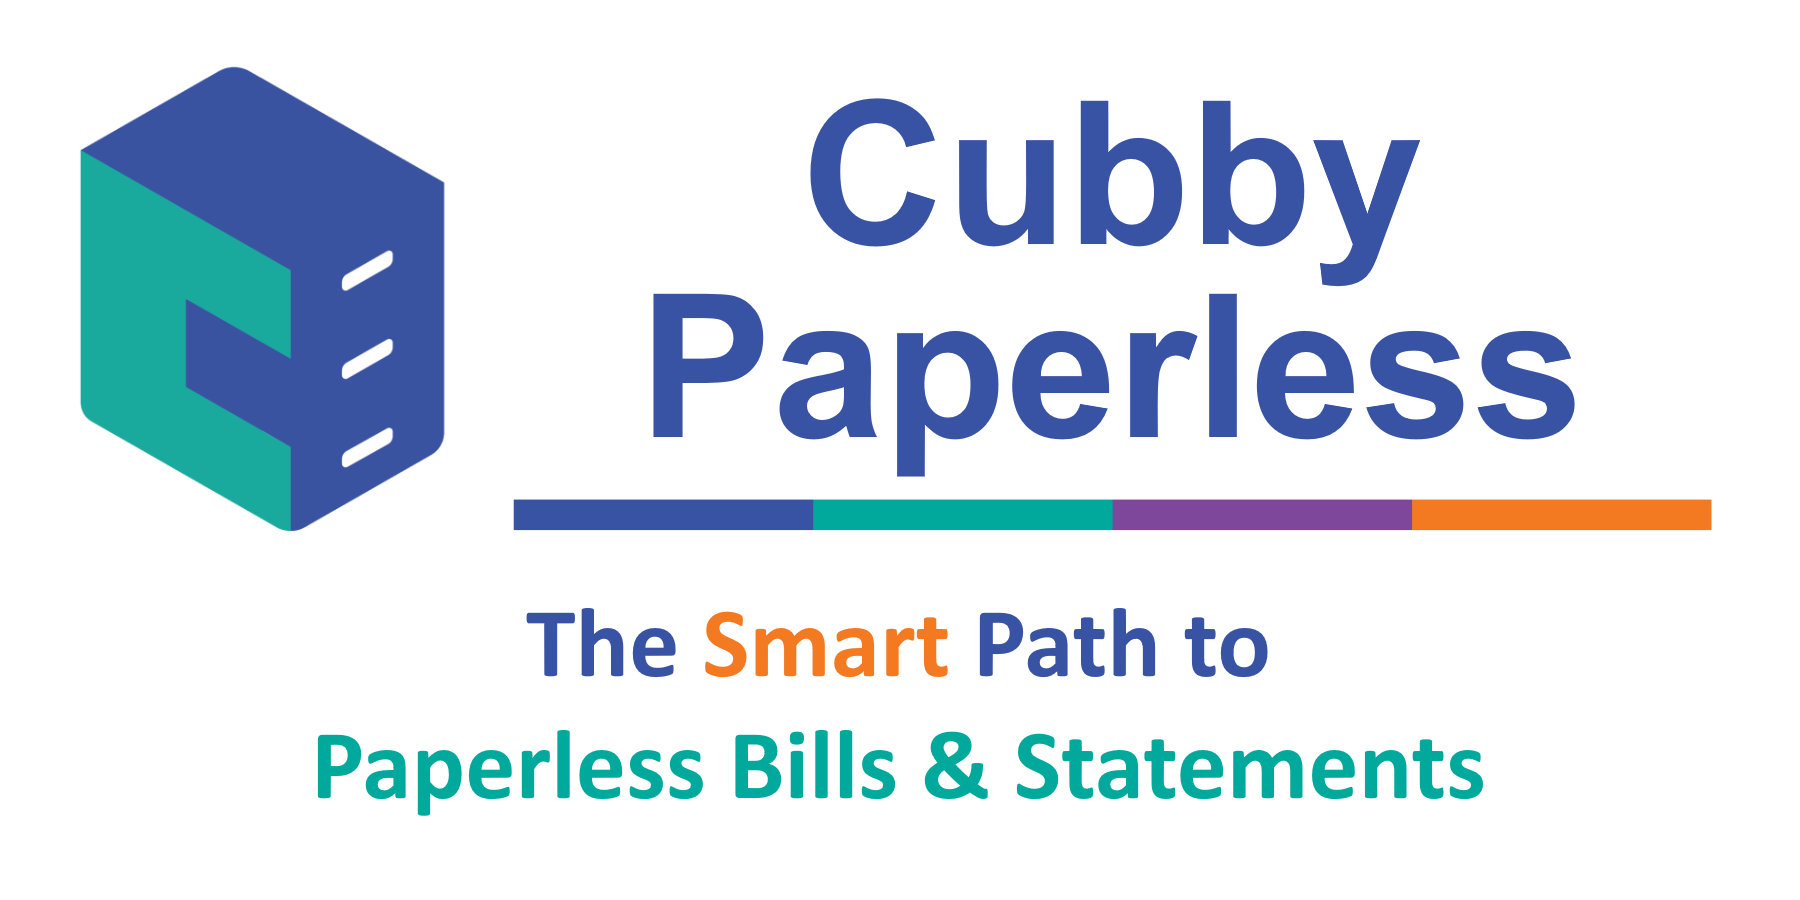 Cubby Paperless - The Smart Path to Paperless